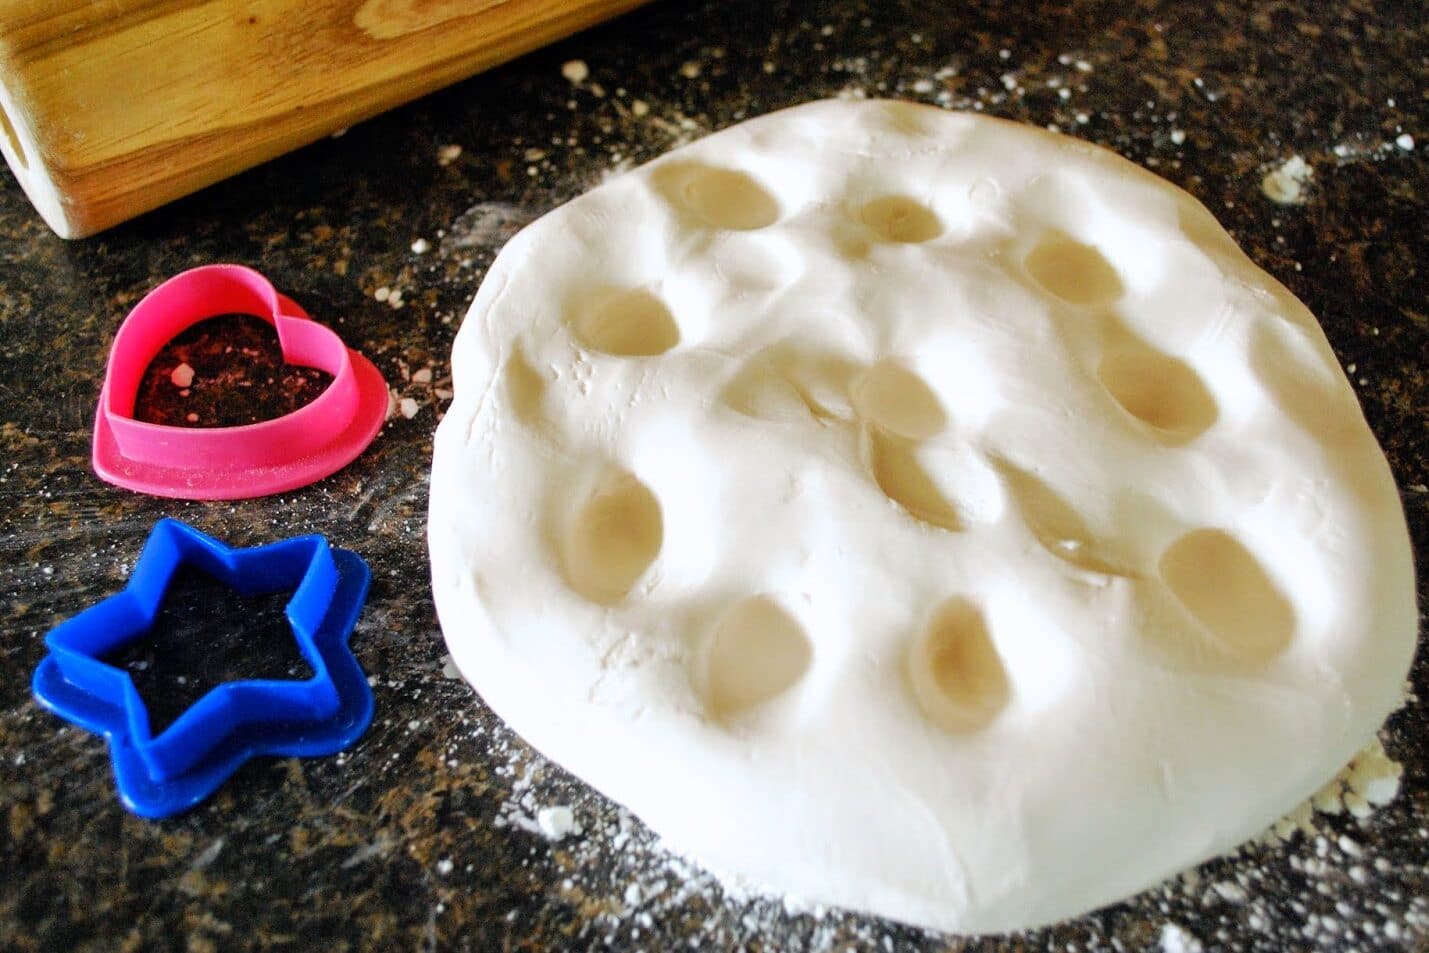 Homemade playdough recipe to use for toddler activities | The Dating Divas